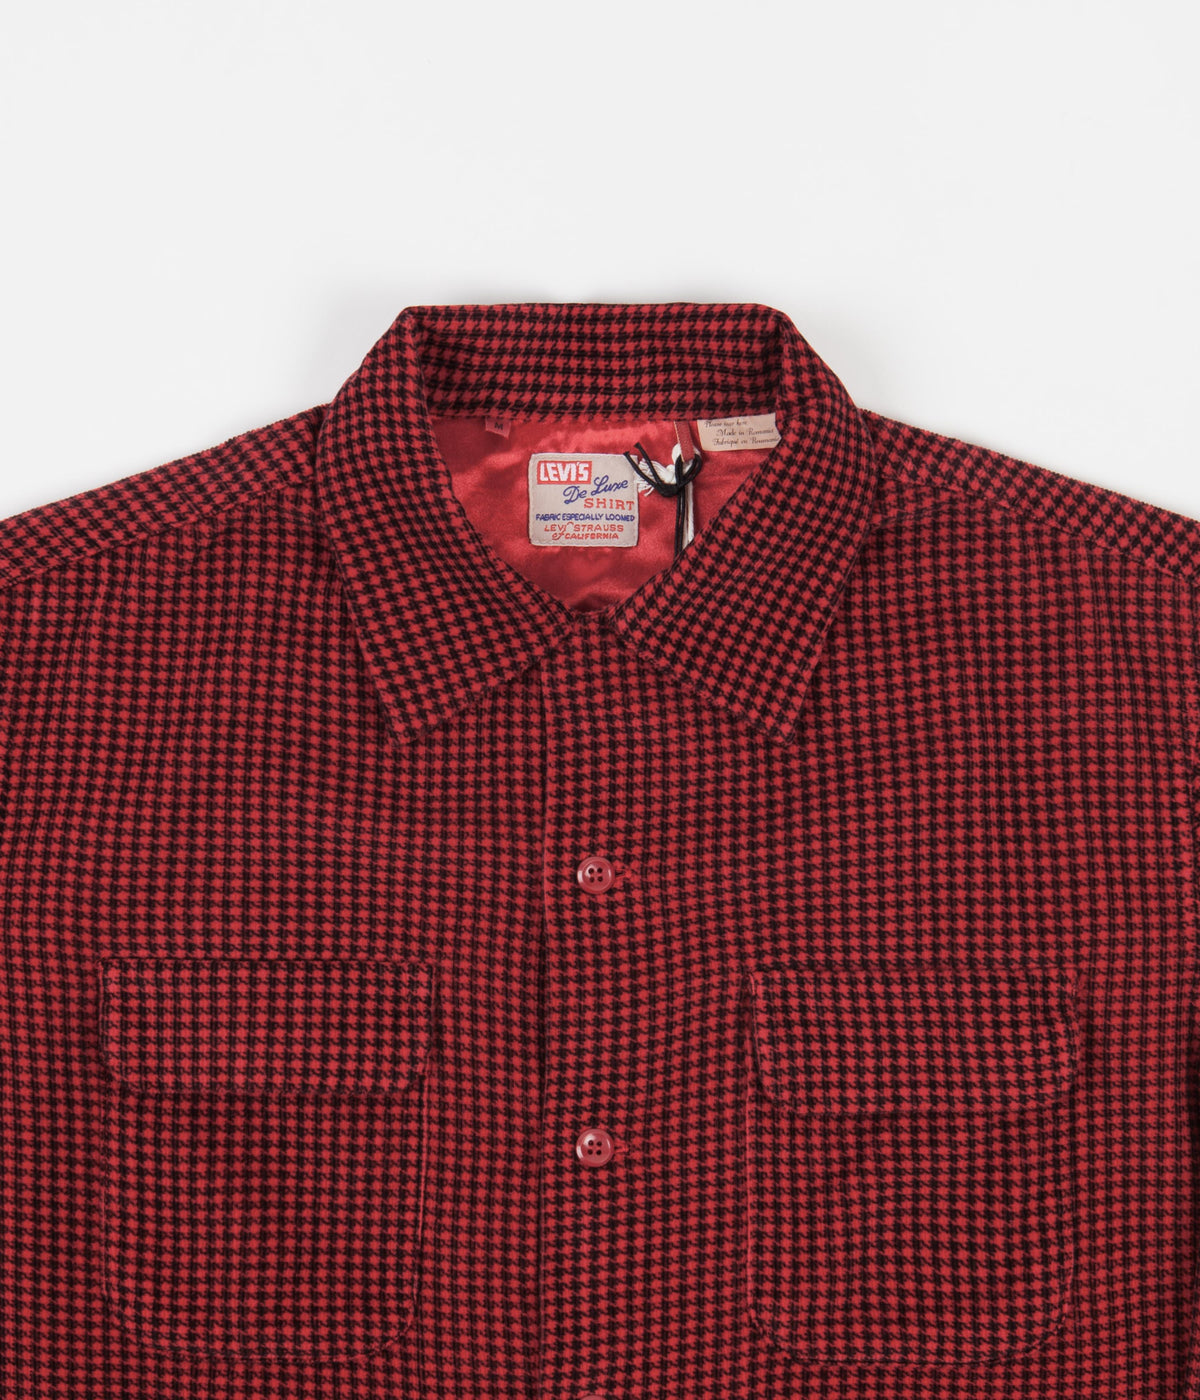 Buy now Levi's Vintage DELUXE CHECK SHIRT LVC DOGTOOT - 0002